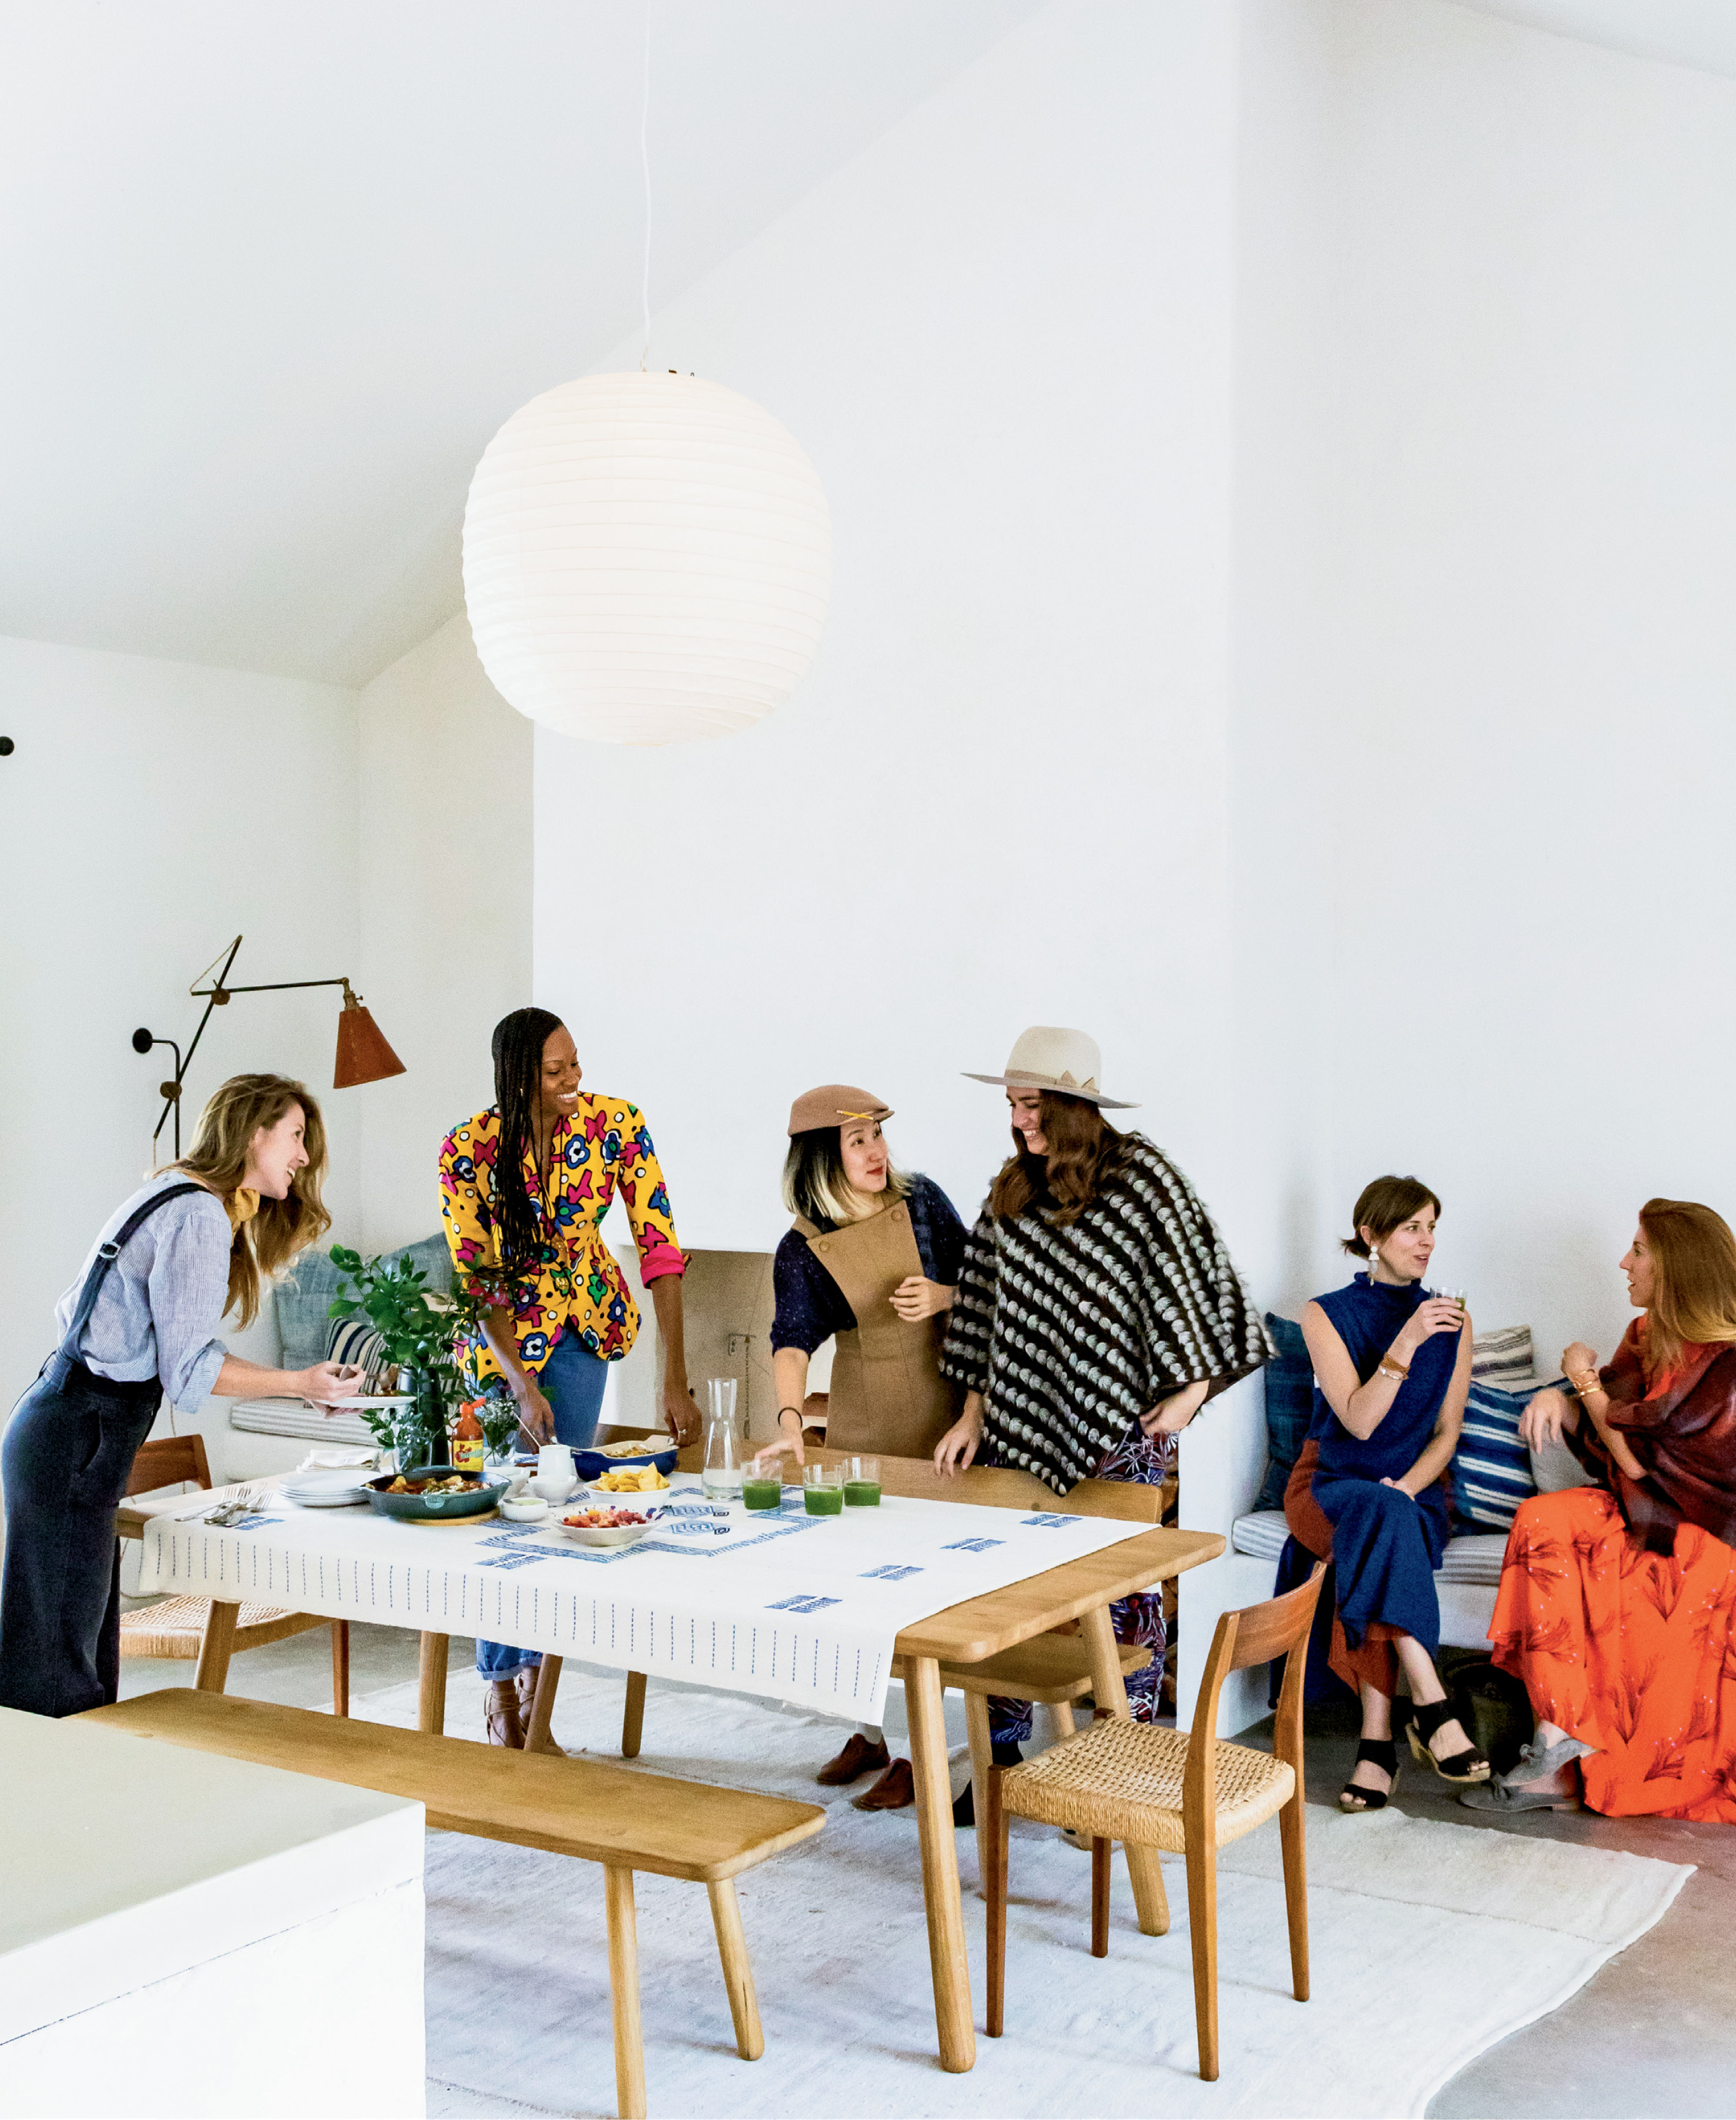 Jessica celebrates her local tribe—(from left to right) Melissa Sutton, Sabrina Hyman, Duolan Li (co-owner of Xiao Bao Biscuit and Tu), Harper Poe, and Ami Murphy—with a healthy brunch at the Sullivan’s Island home of Melinda Wood (not pictured).